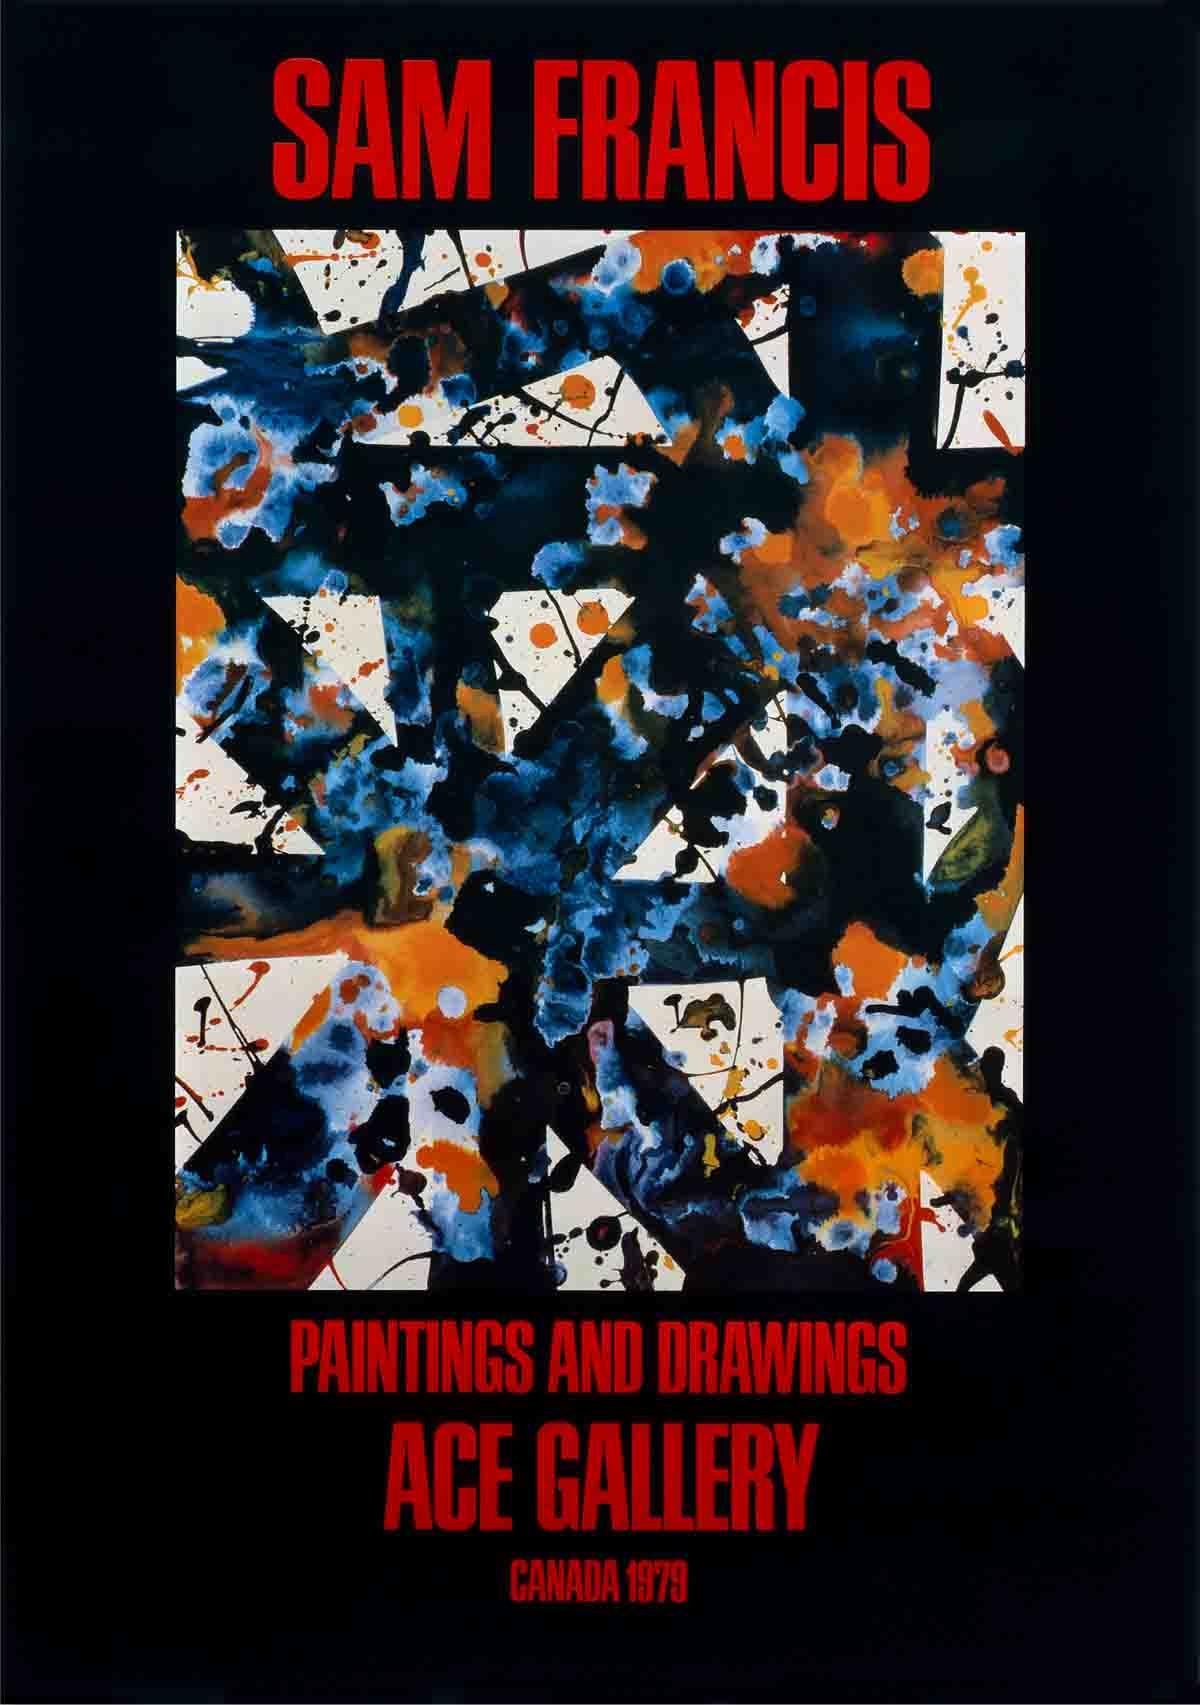  Paper Size: 55 x 40 inches ( 139.7 x 101.6 cm )
 Image Size: 55 x 40 inches ( 139.7 x 101.6 cm )
 Framed: No
 Condition: A-: Near Mint, very light signs of handling
 
 Additional Details: Large, exhibition poster after Sam Francis for an exhibition